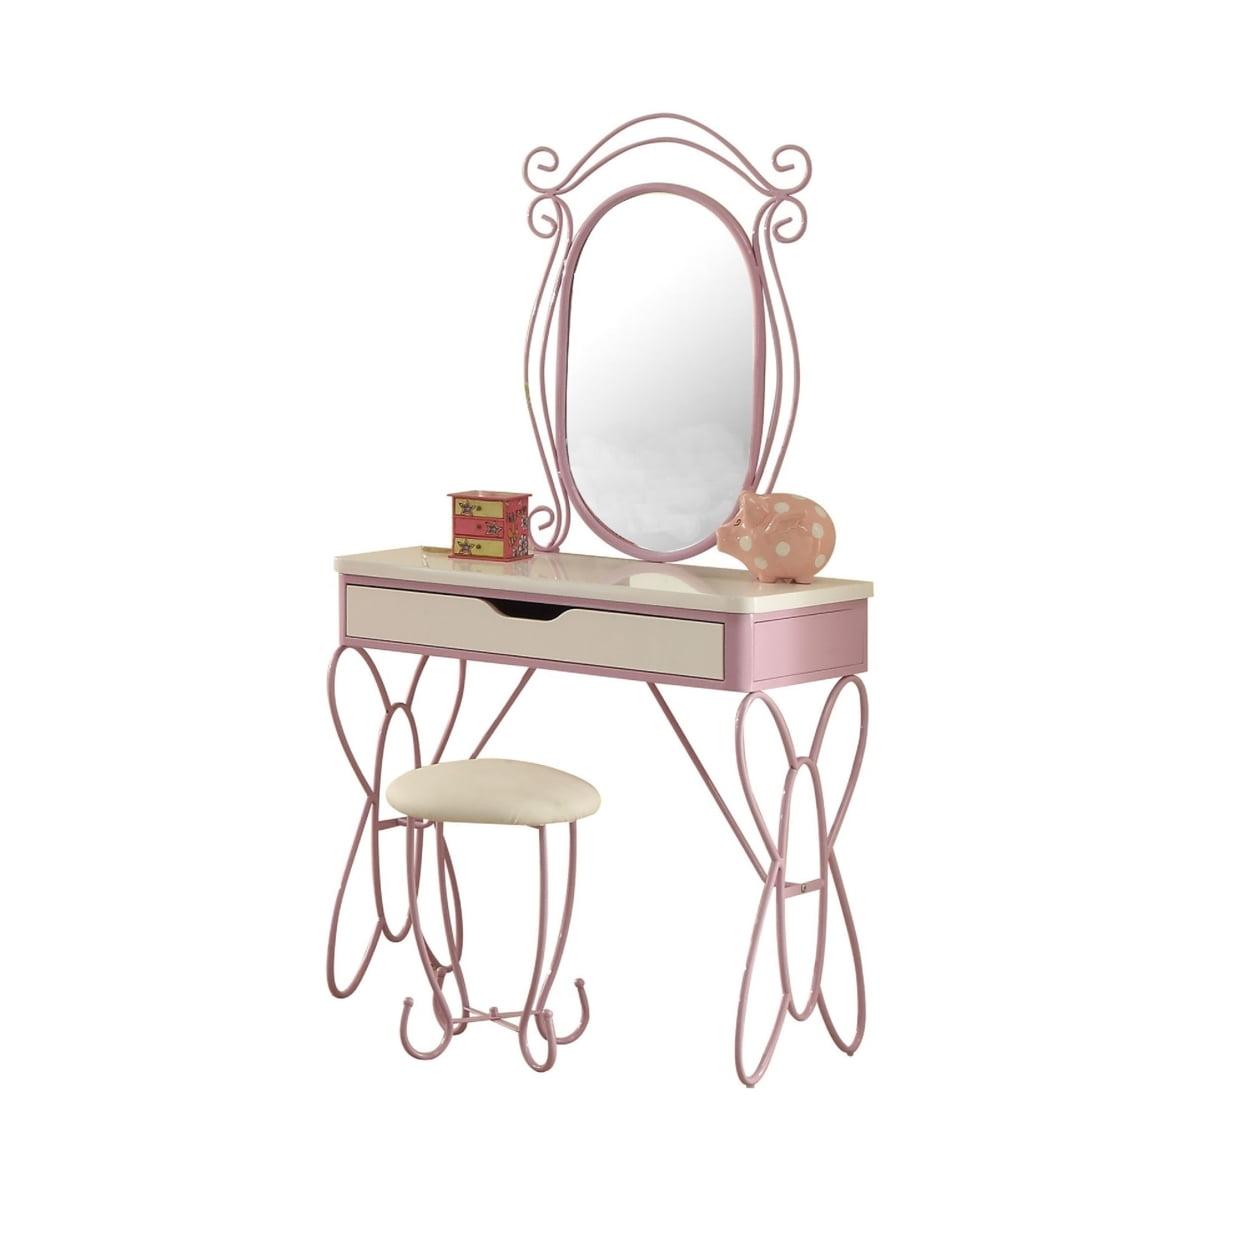 Priya Butterfly Charm White and Light Purple Vanity Set with Bench